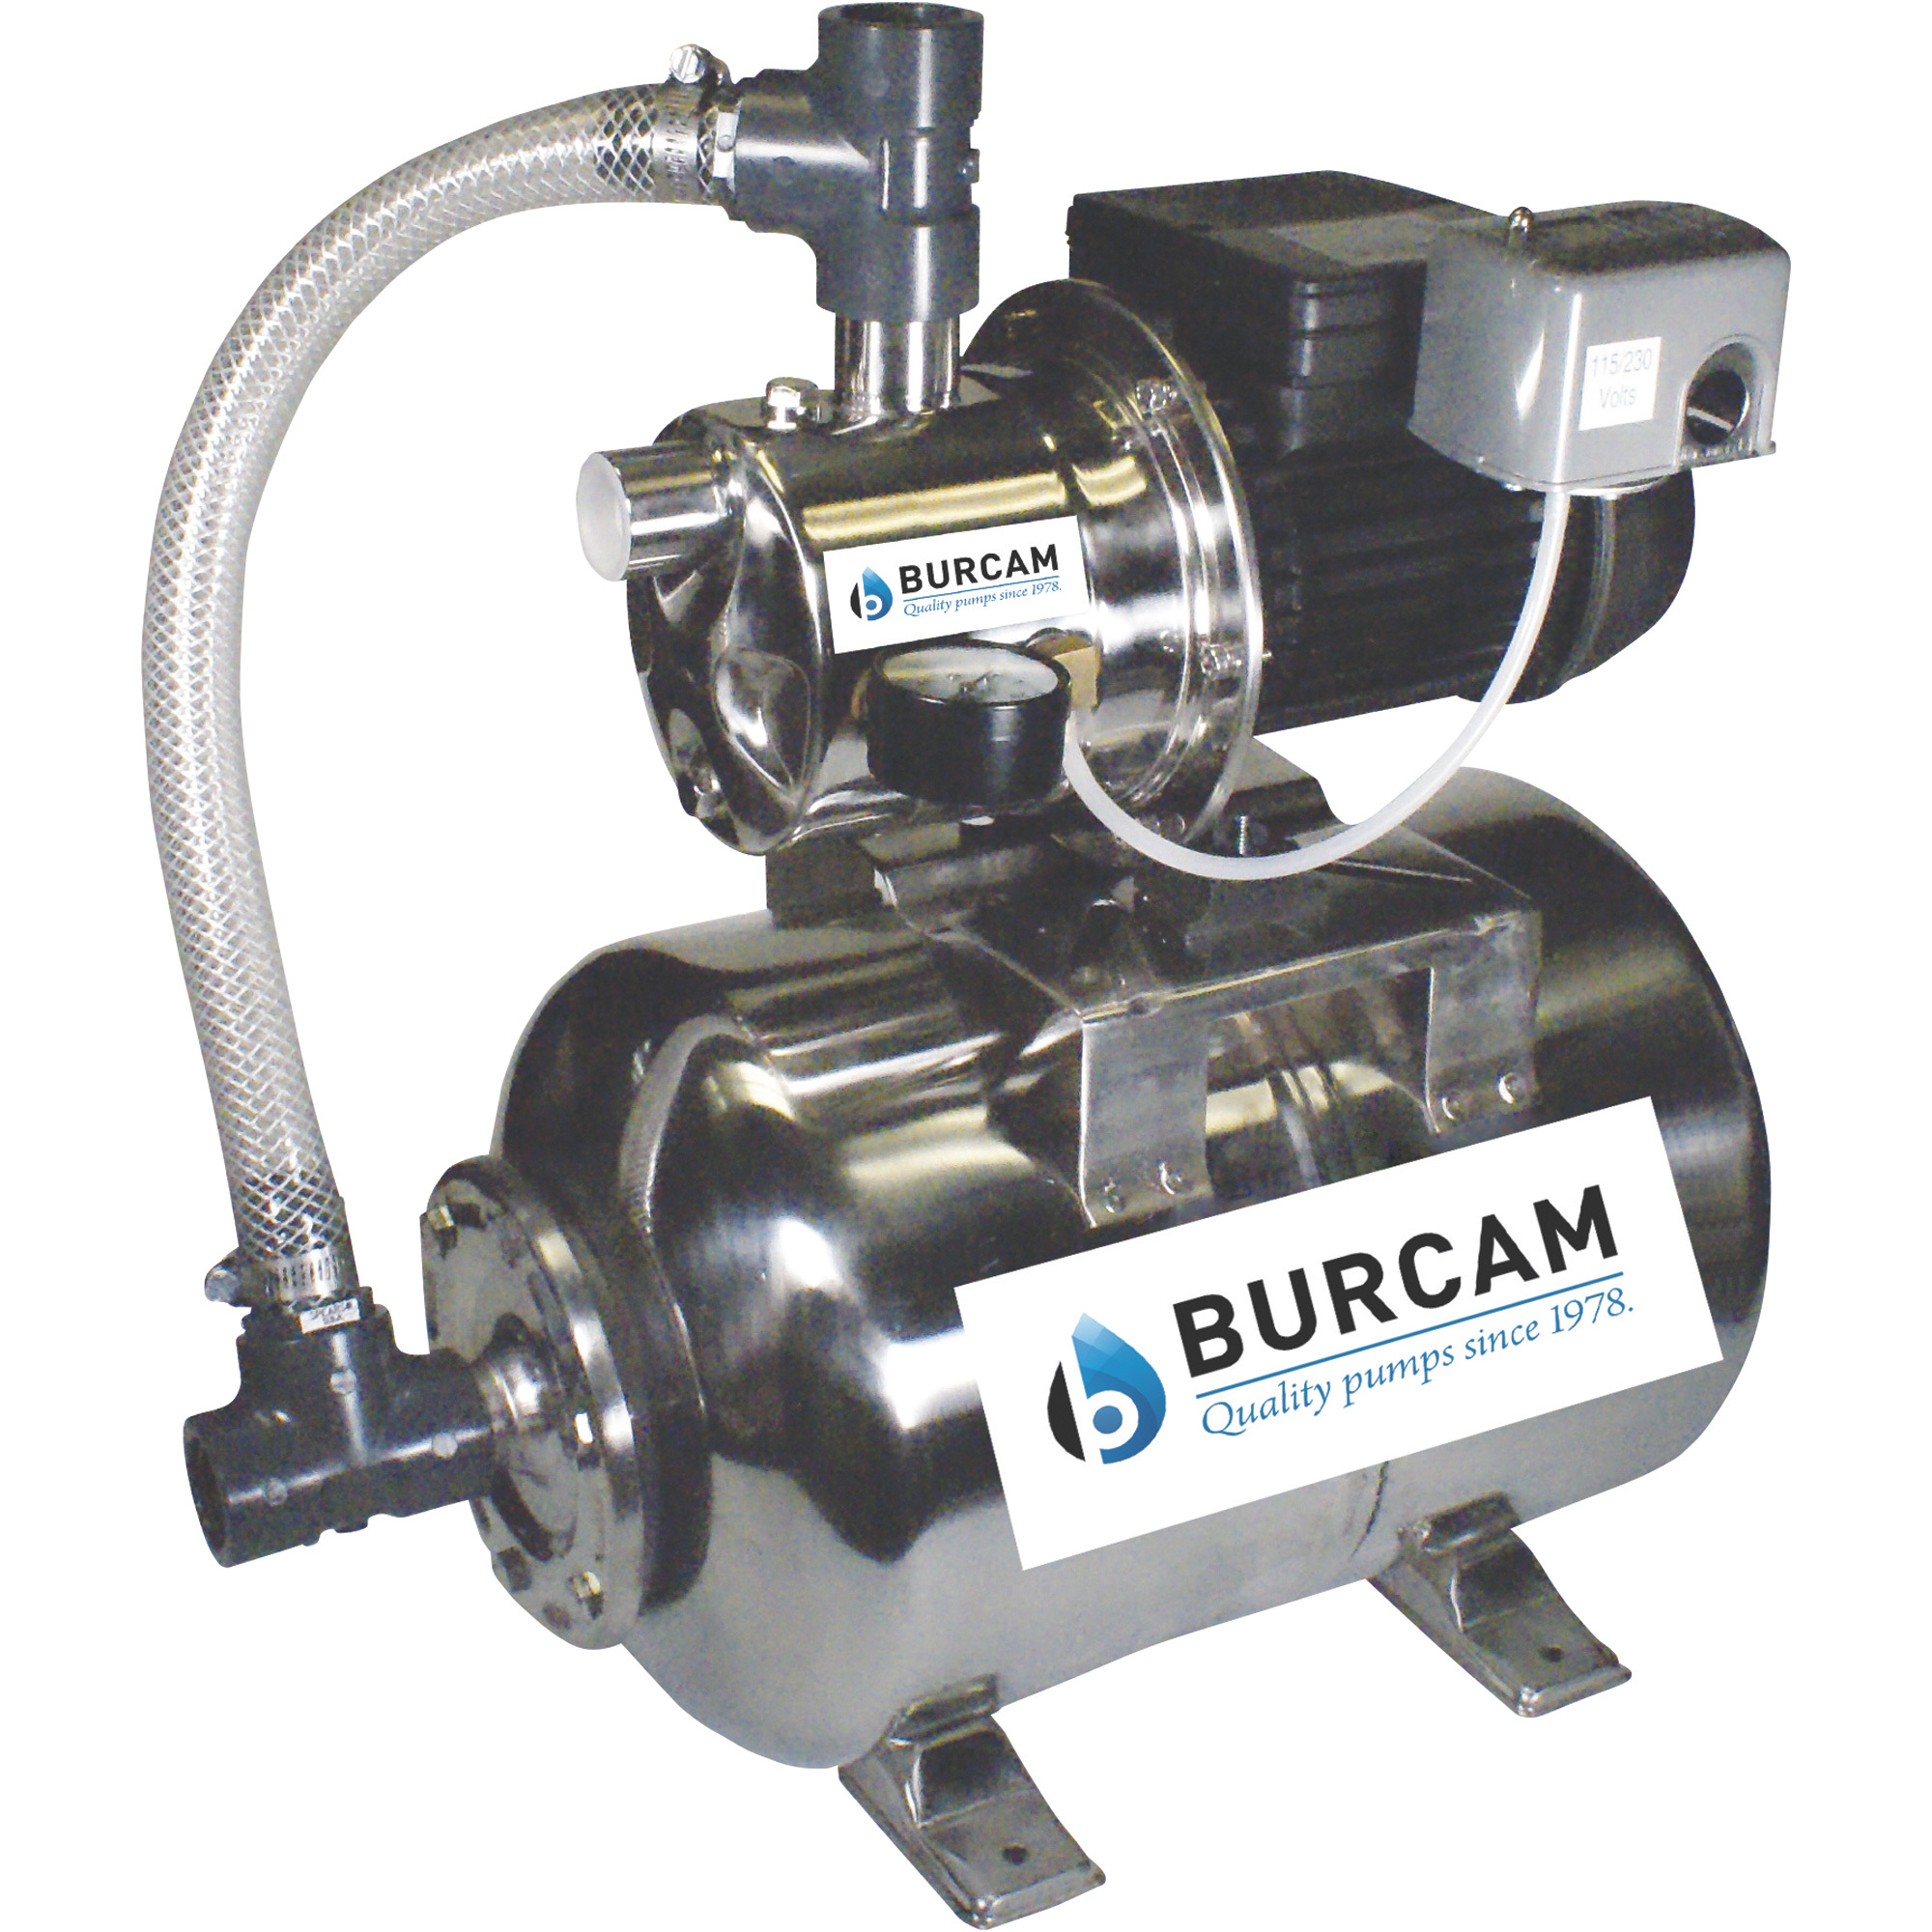 BurCam Stainless Steel Shallow Well Jet Pump with 6.6-Gallon Tank â 3/4 HP, 900 GPH, Model 506547SS